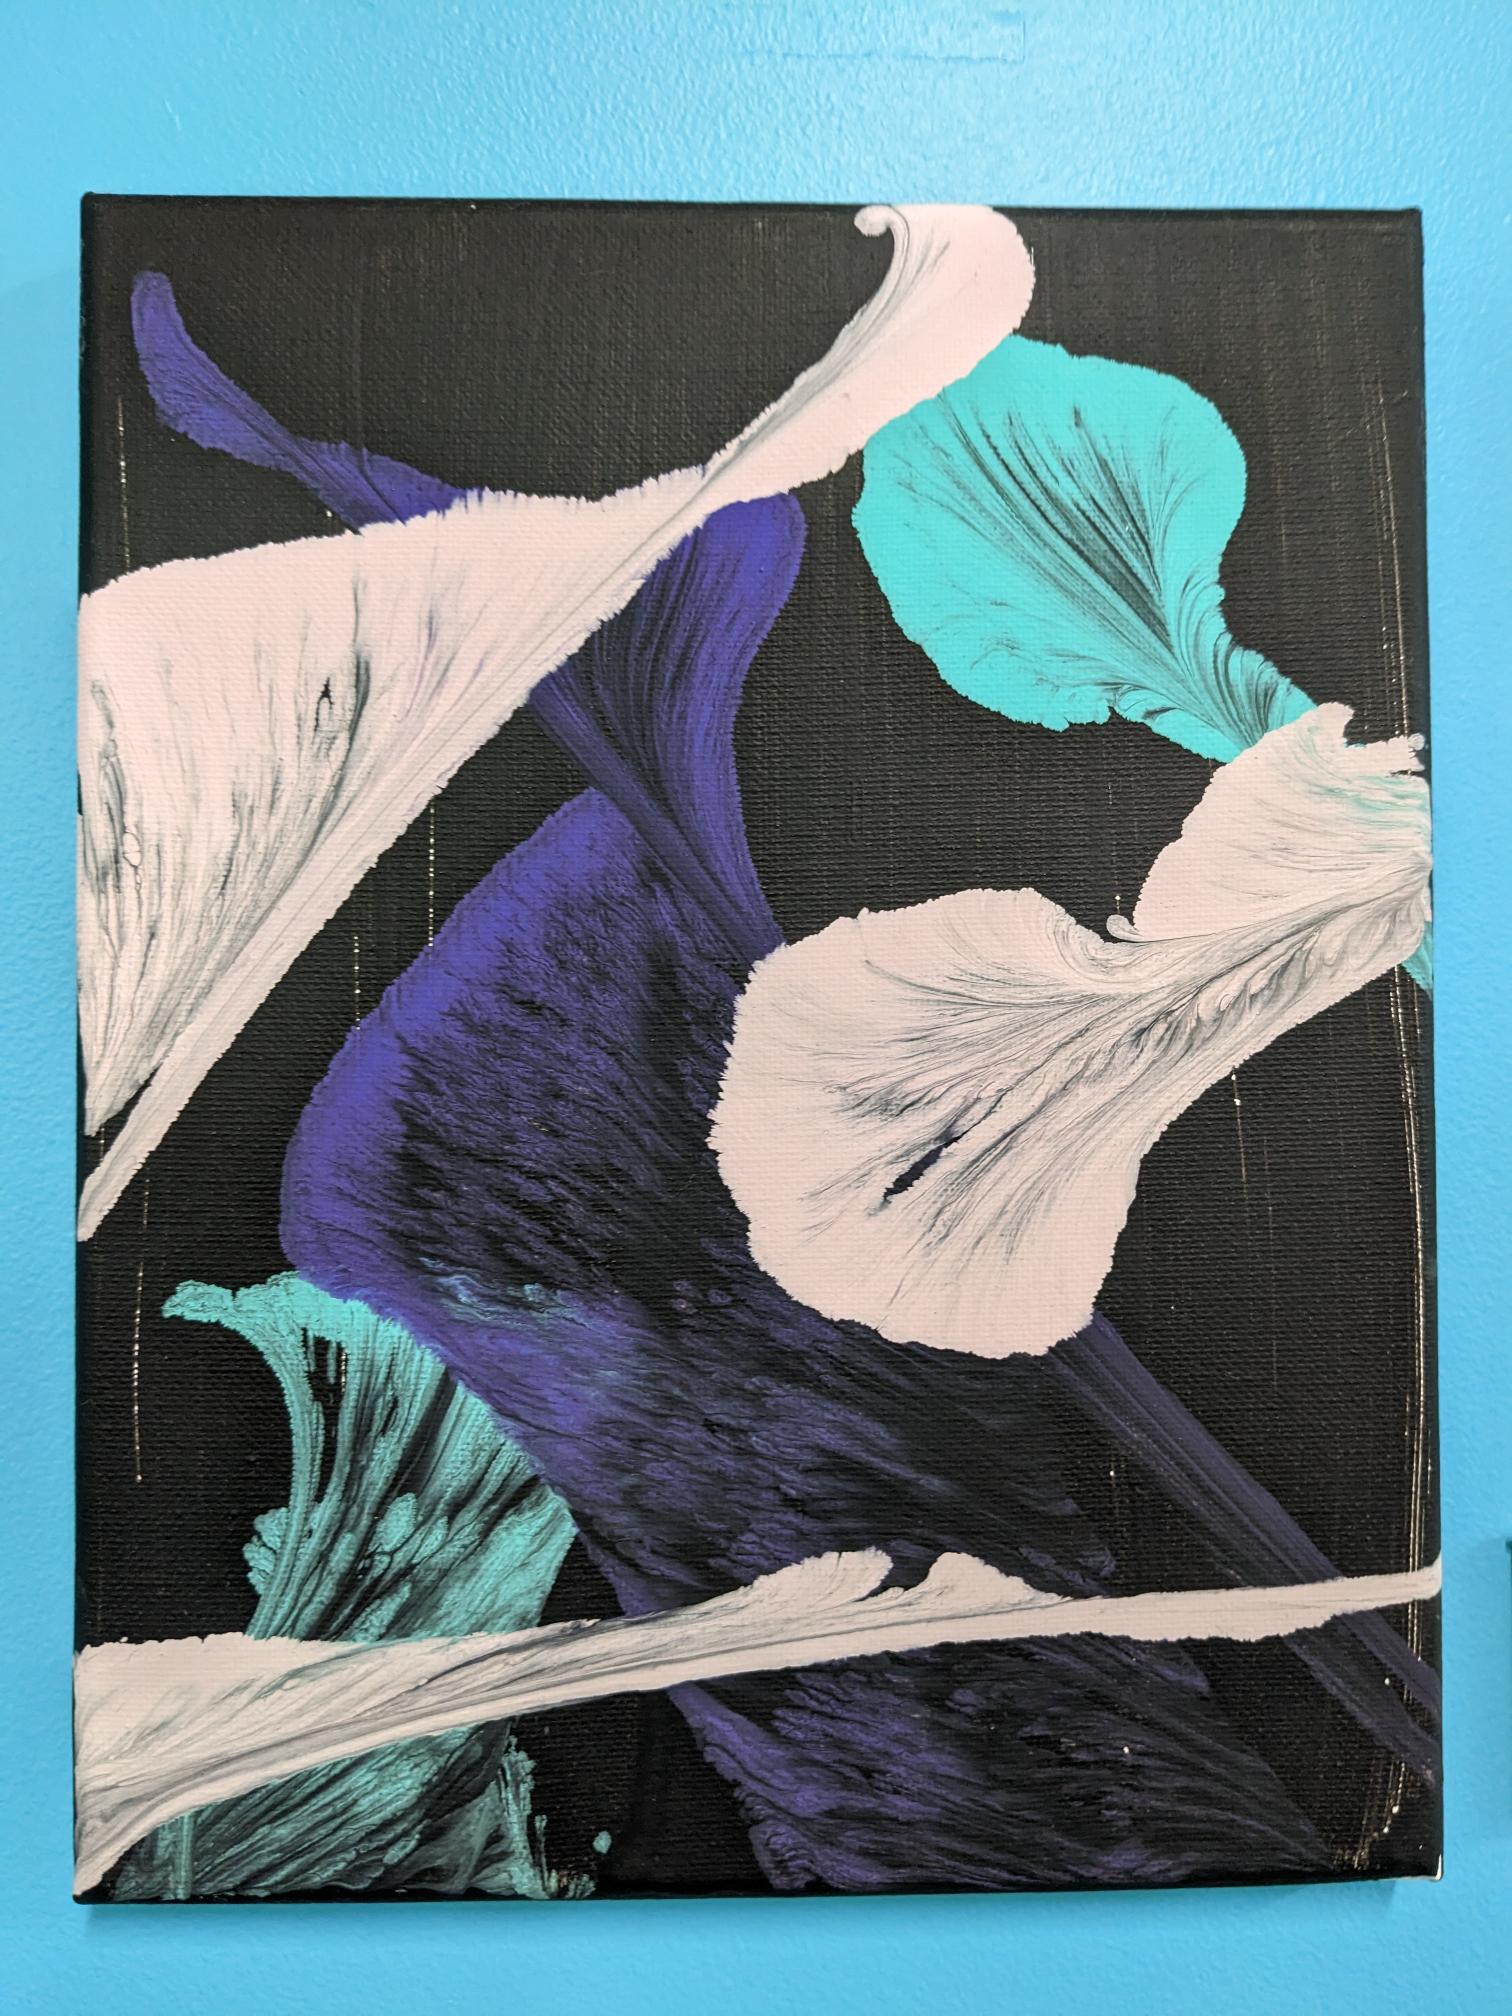 black canvas with examples of string pull in purple, teal, and peach paints (paint pouring technique)